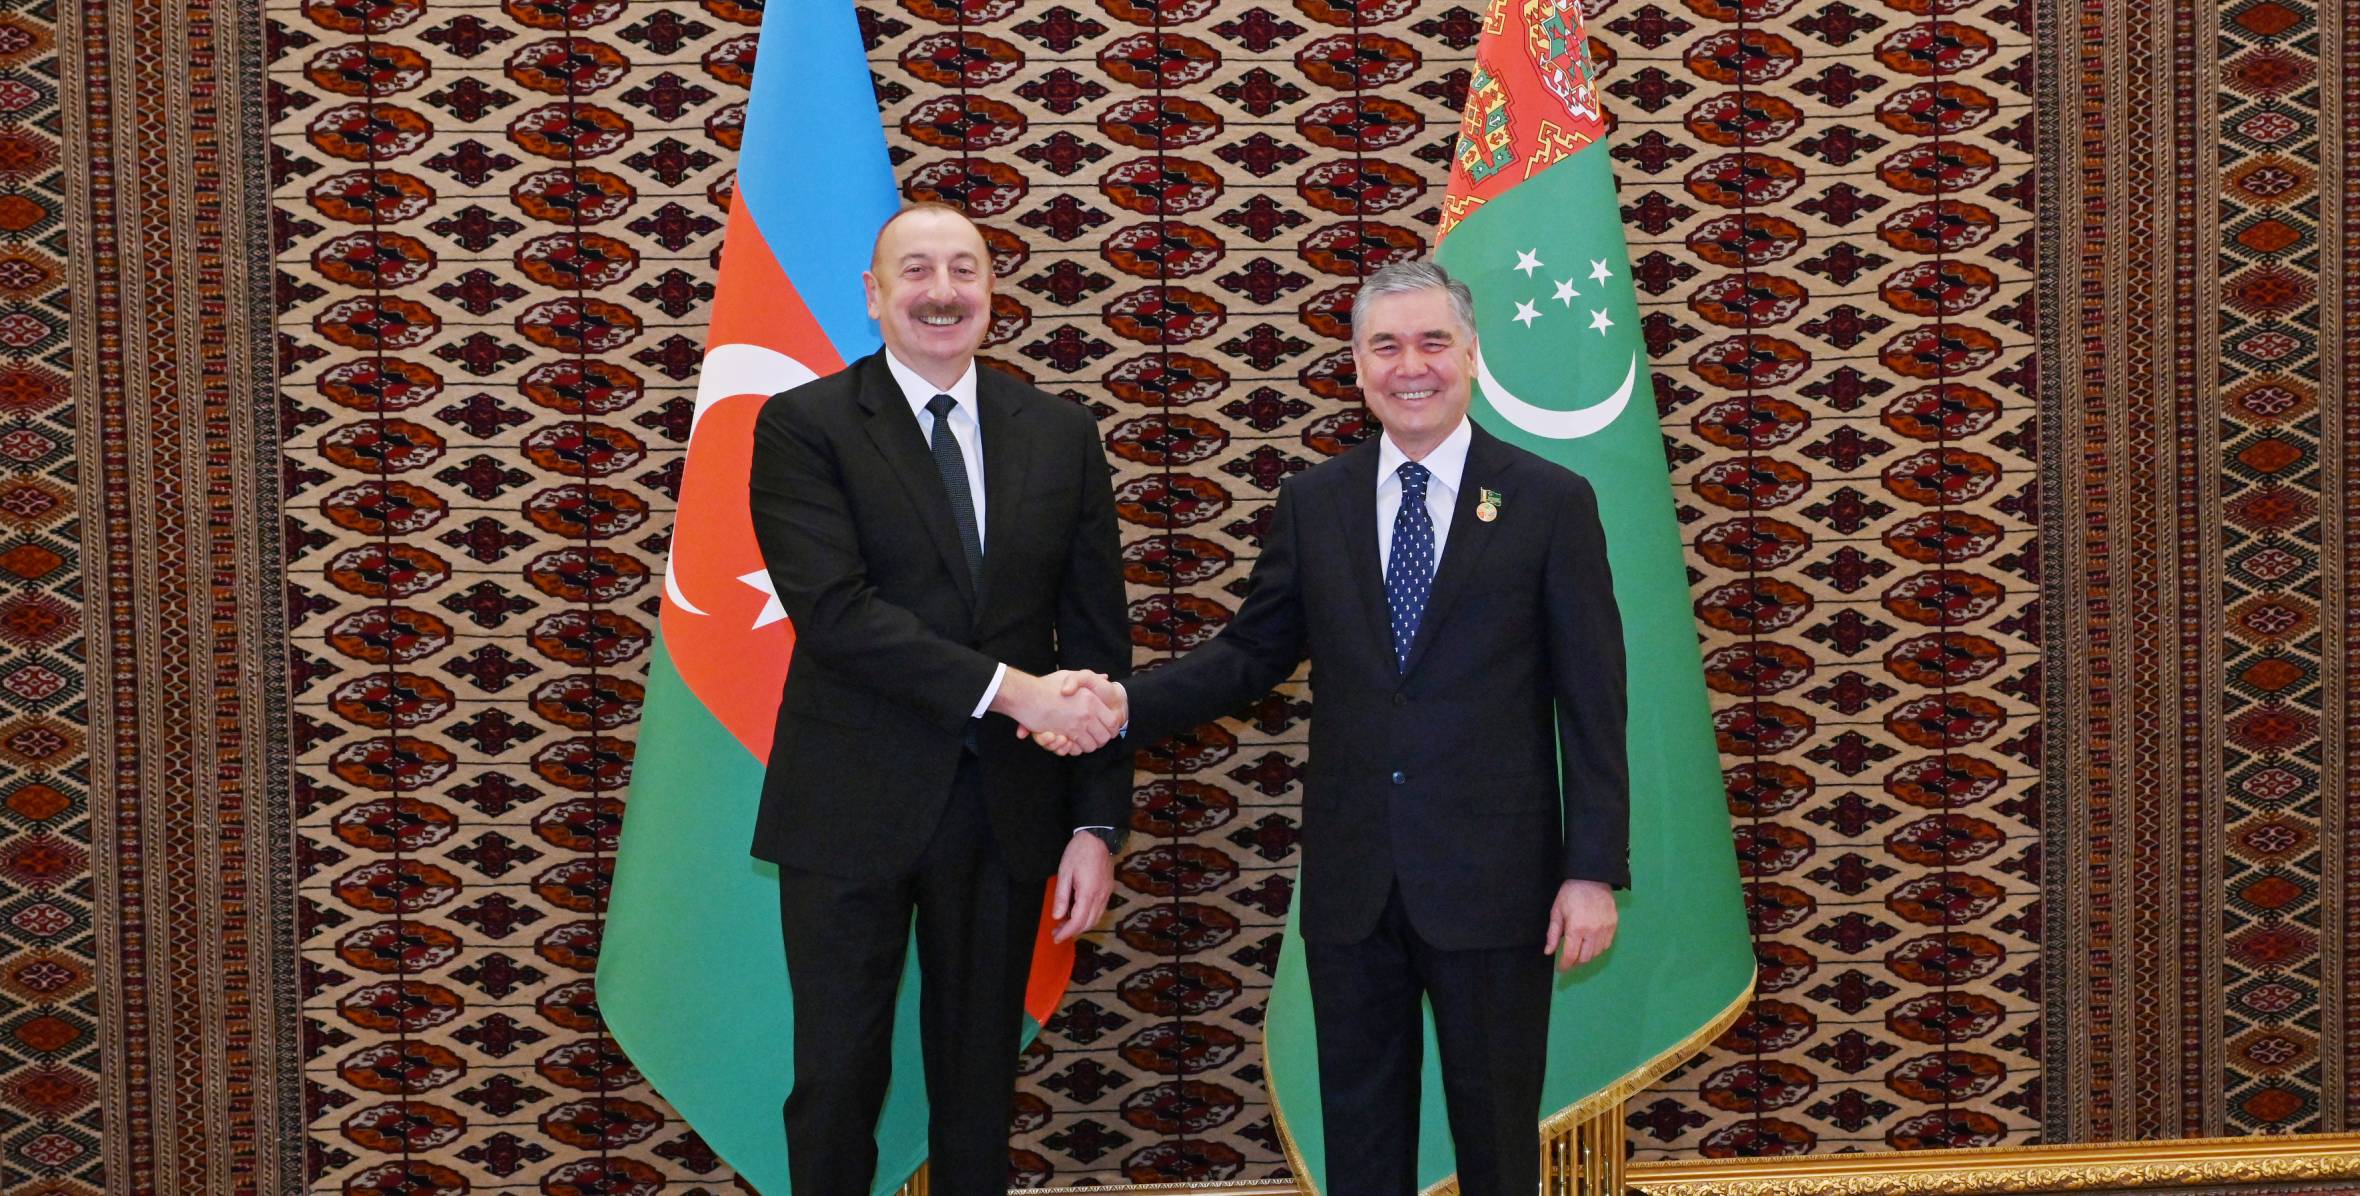 Ilham Aliyev met with the Chairman of the Halk Maslakhaty of the Milli Gengesh of Turkmenistan